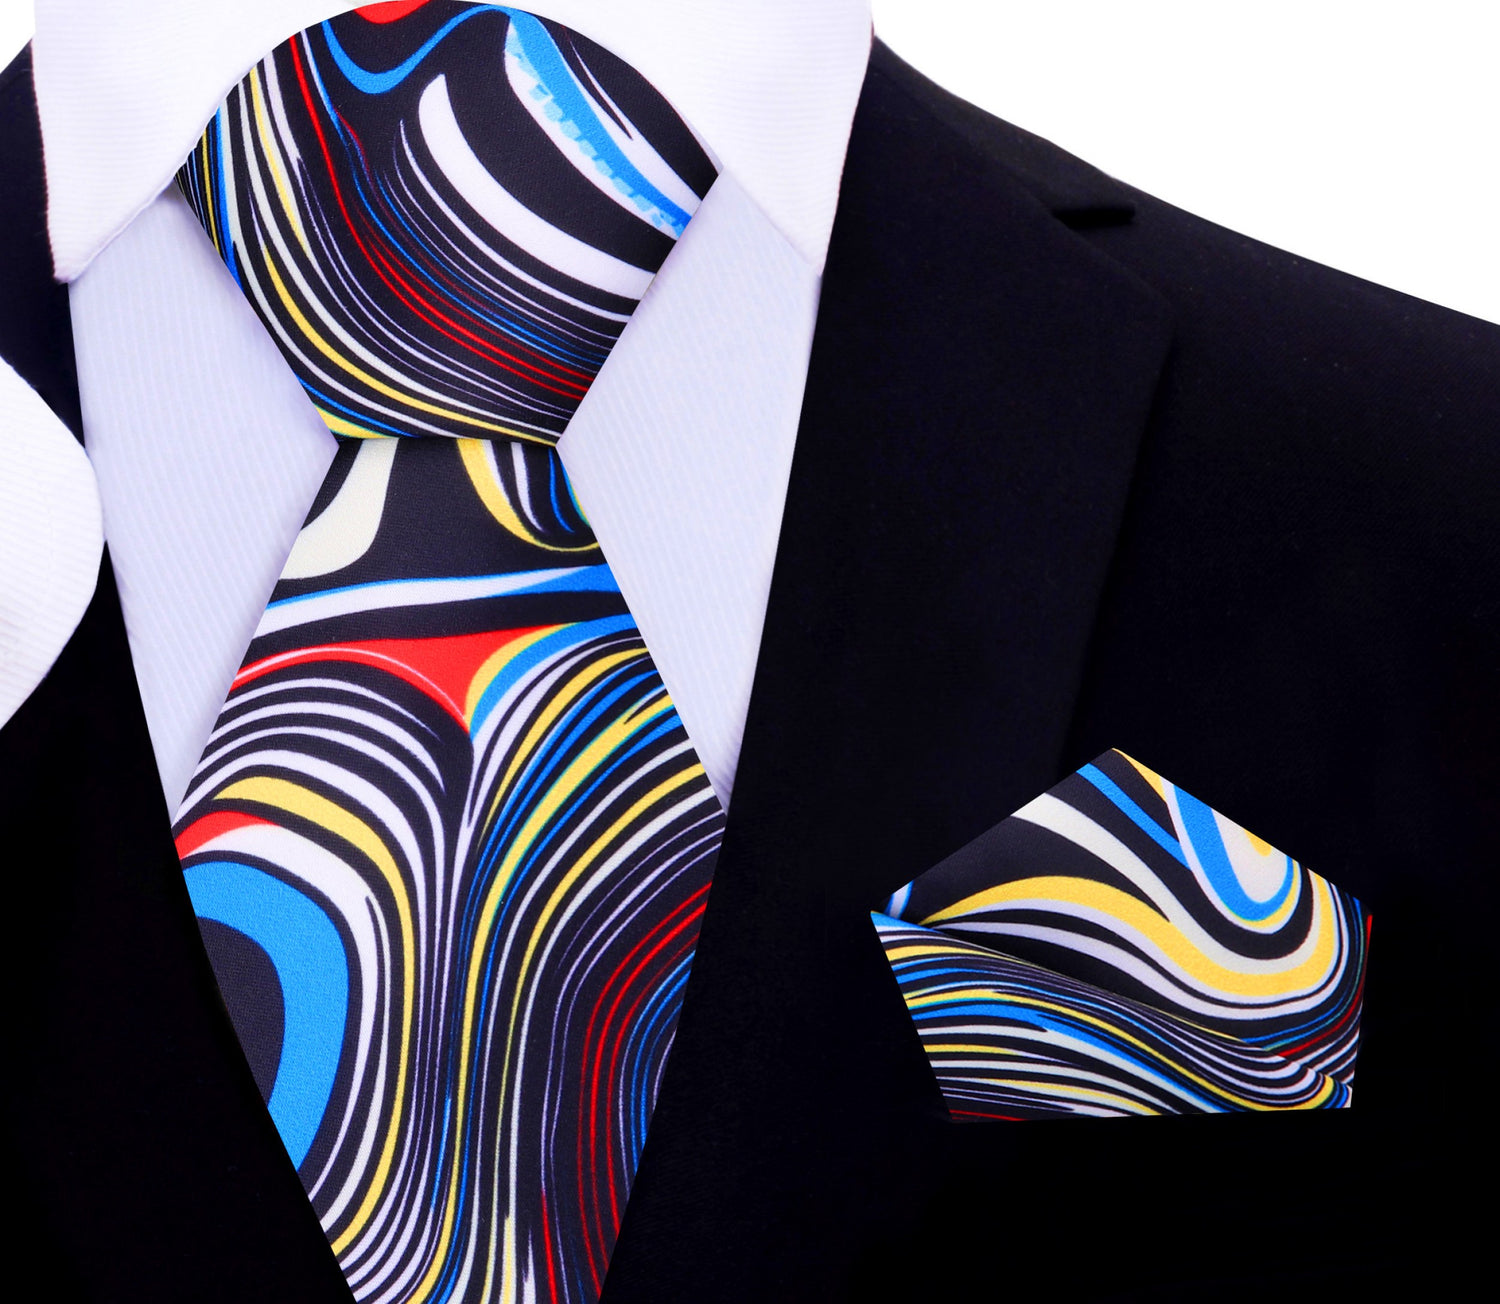 A Red, Blue, Yellow Abstract Swirl Pattern Silk Necktie, Matching Pocket Square||Red, Blue, White, Yellow